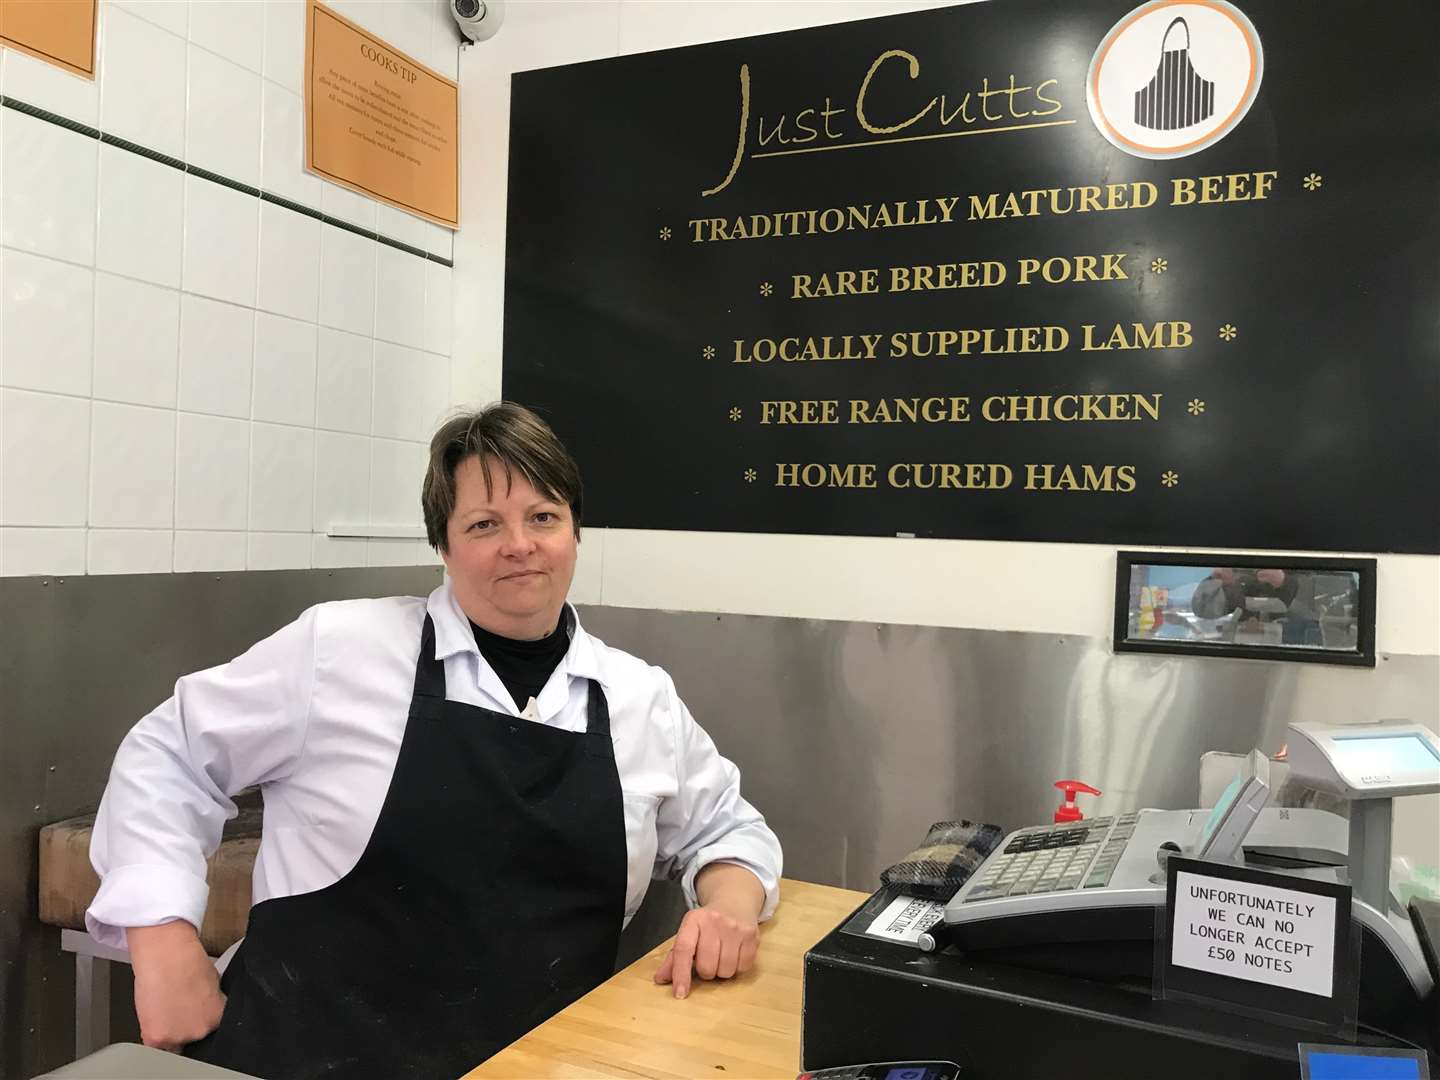 Teresa Cutts, owner of Just Cutts Butchers